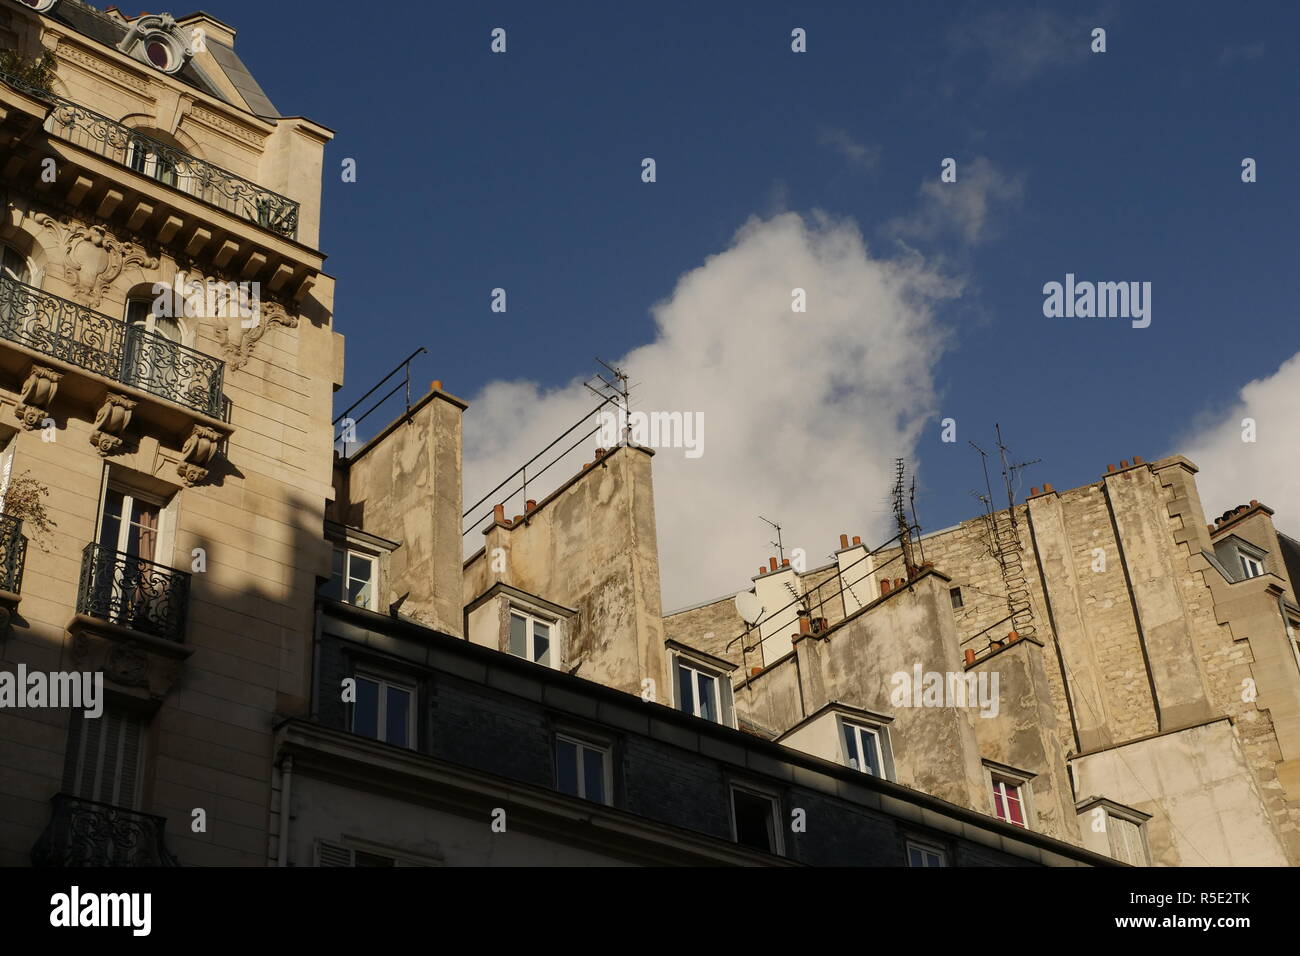 Rooftops and windows of Paris. A view of rooftops and windows shining in the Parisienne sun. Stock Photo